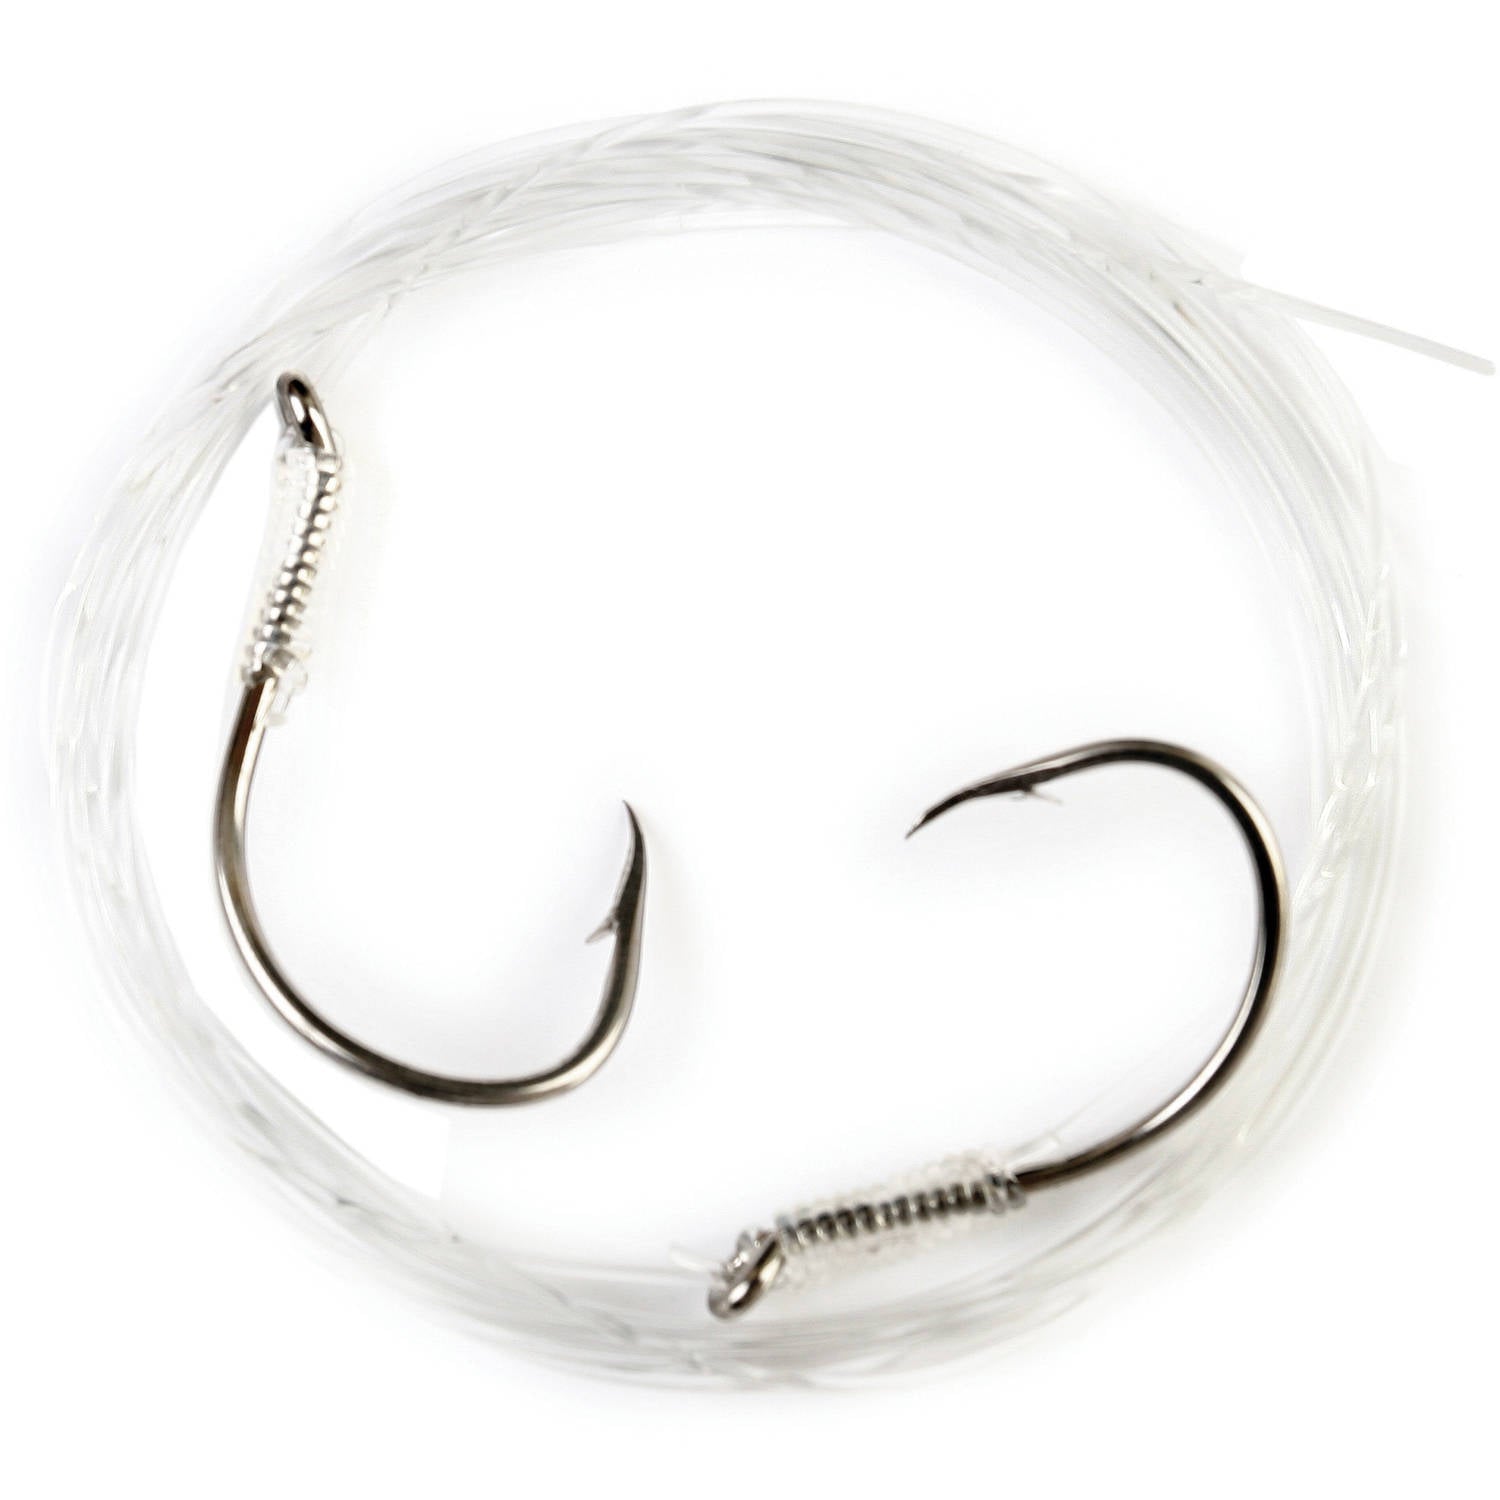 Eagle Claw Lazer Sharp Circle Offset Hook  Sea Guard  Size 3/0  40 Pack